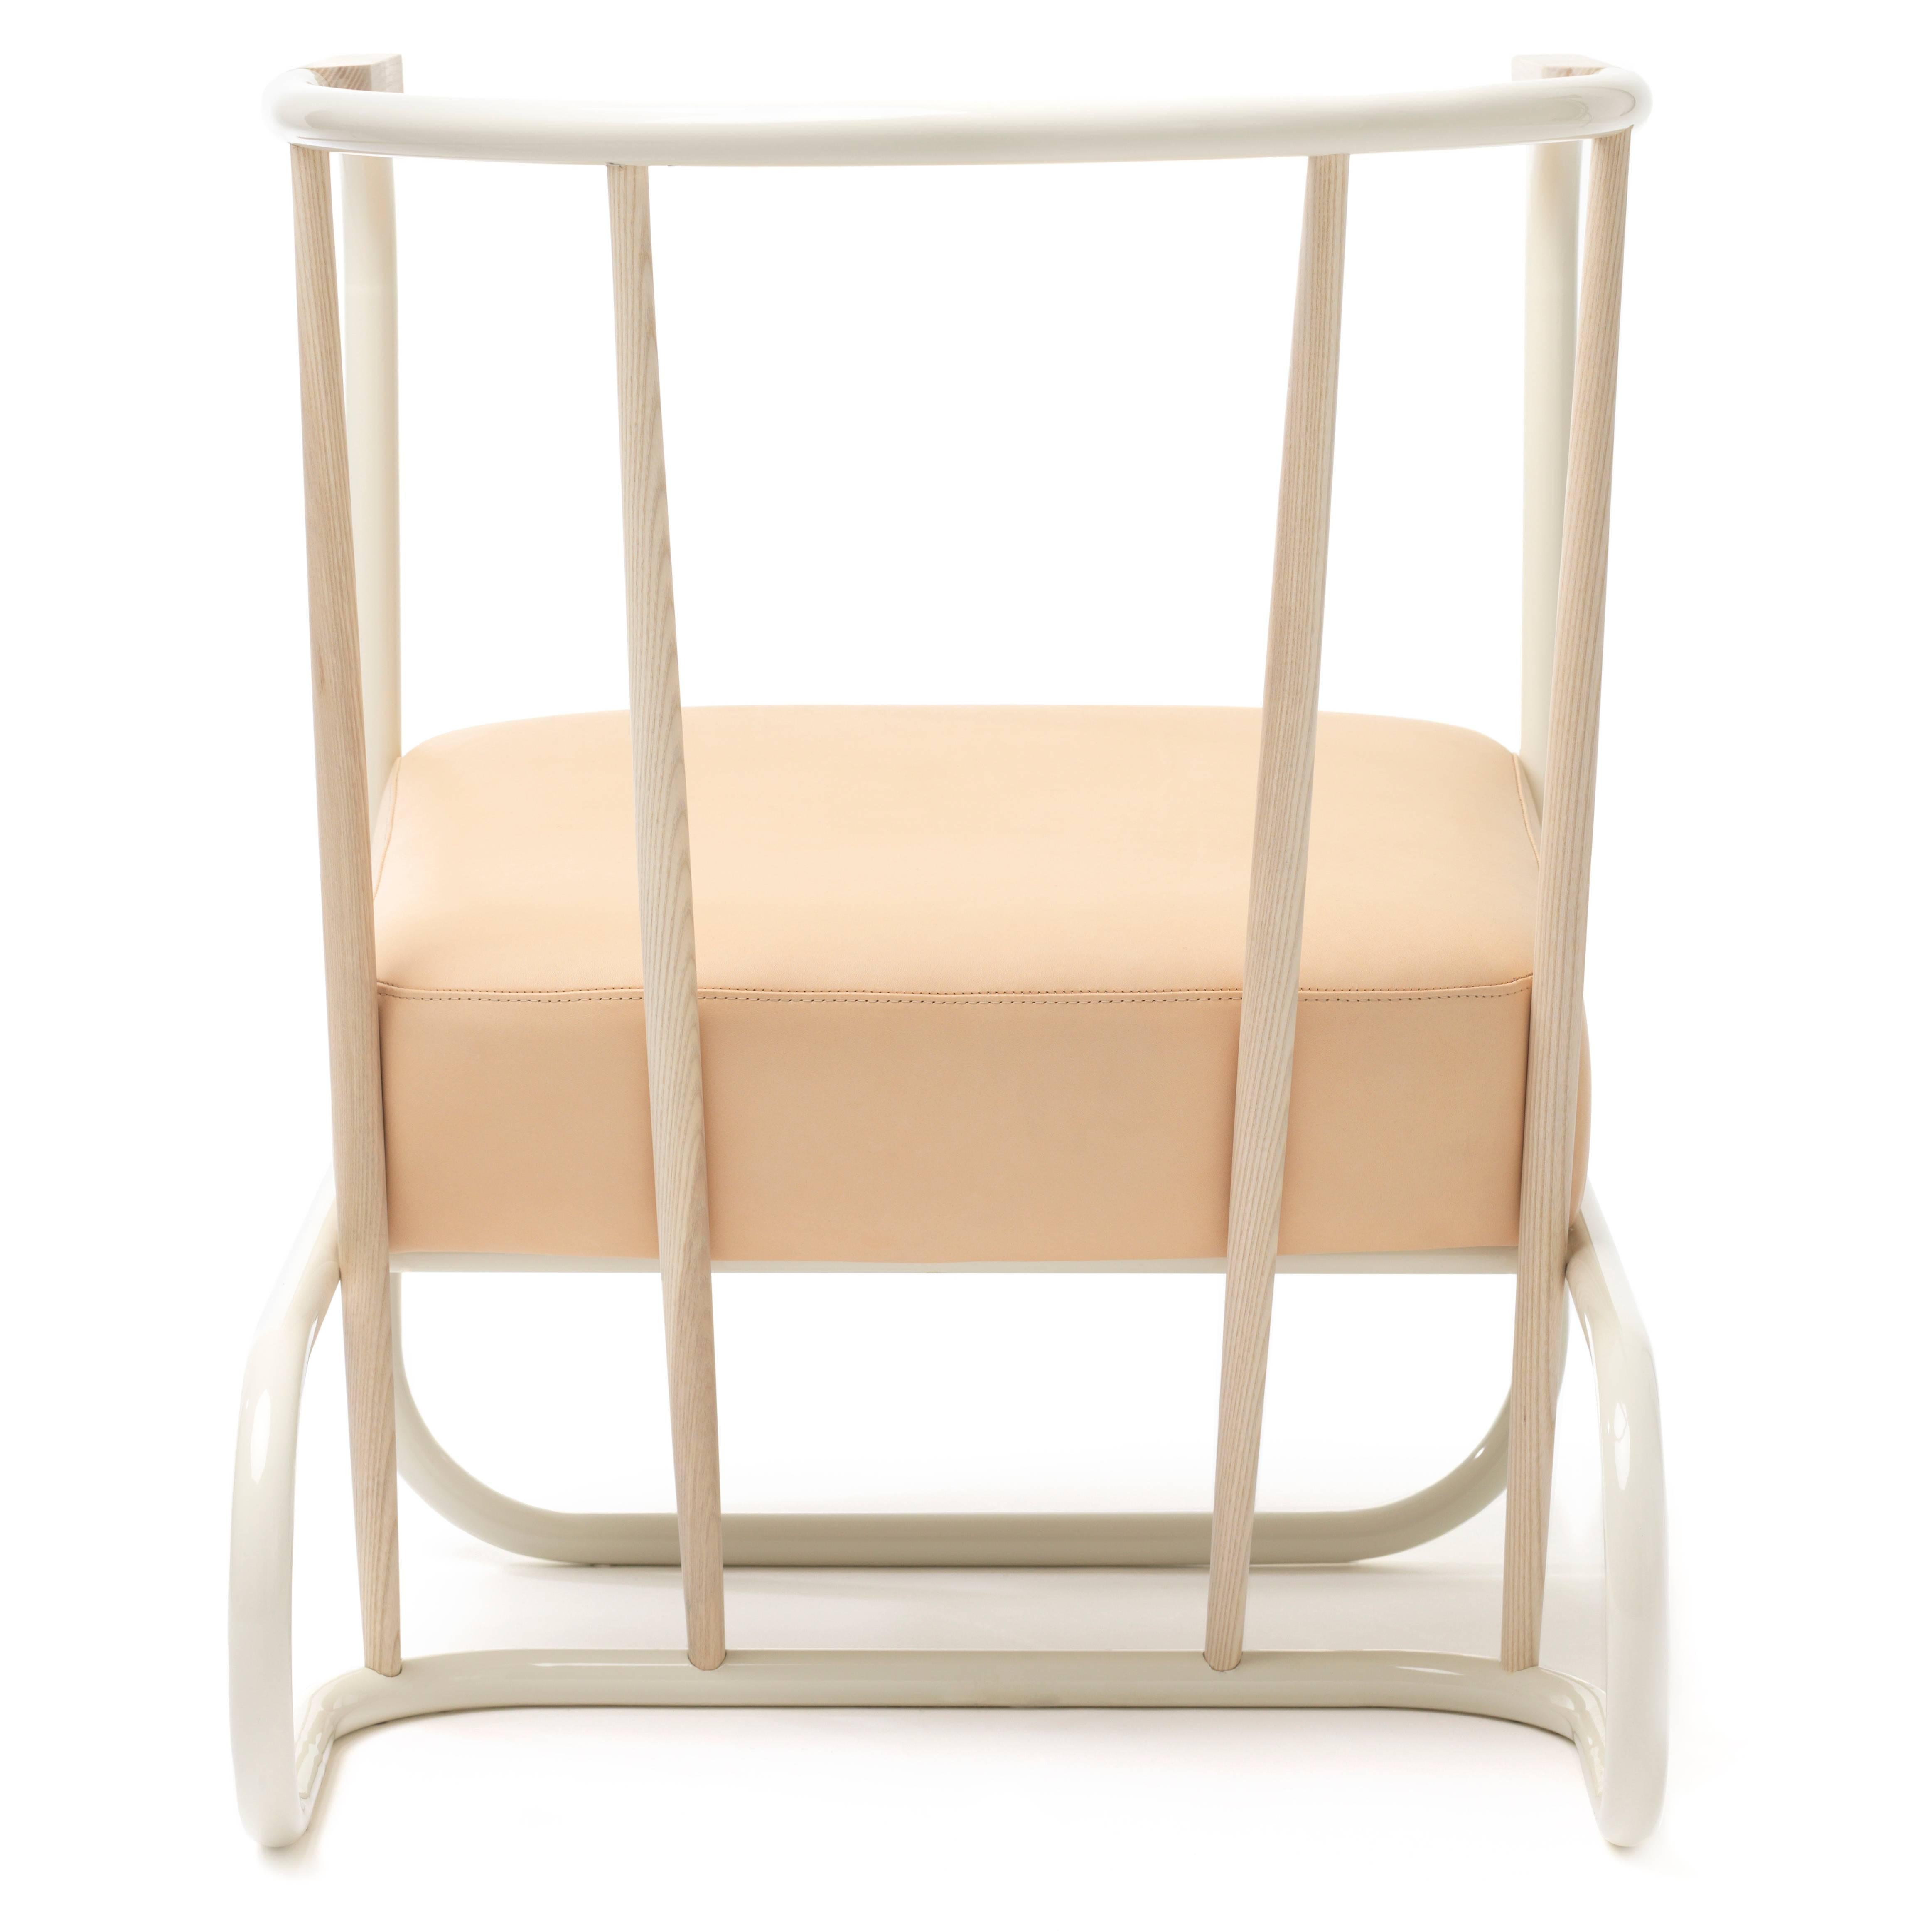 This armchair combines three traditional Swedish techniques of working with wood, metal and leather. The object is shown in a neutral pallet but a variety of leathers and colors are available.

In this chair Swedish steel has been flattened and